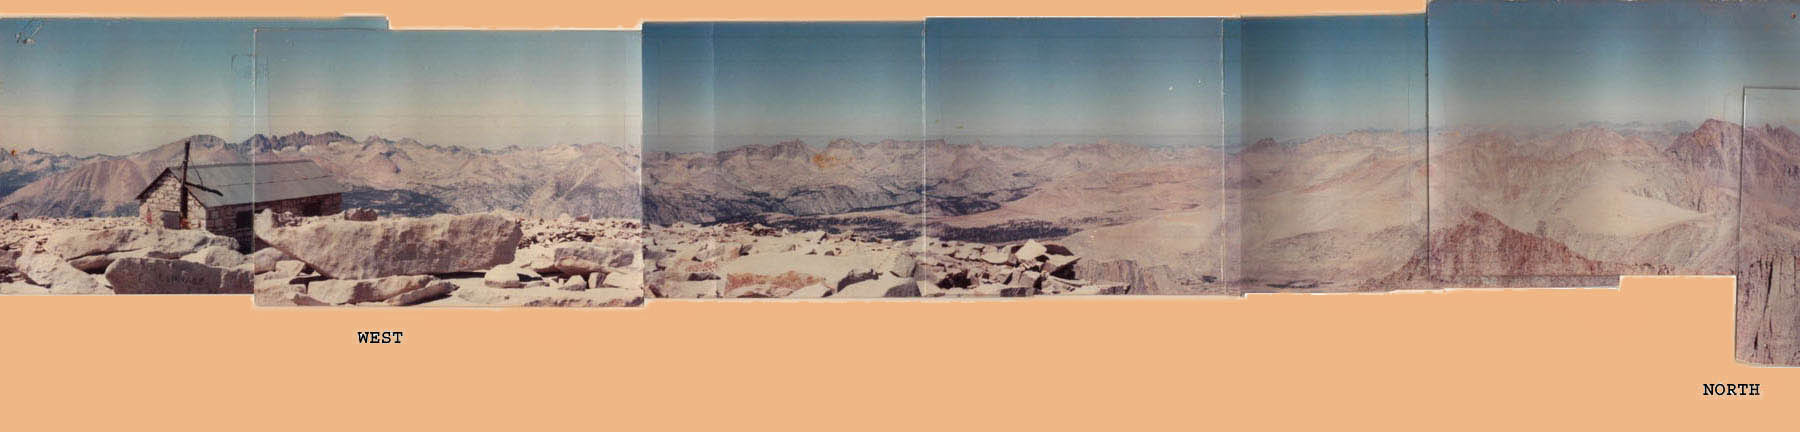 360-degree Panorama from Summit of Mt. Whitney